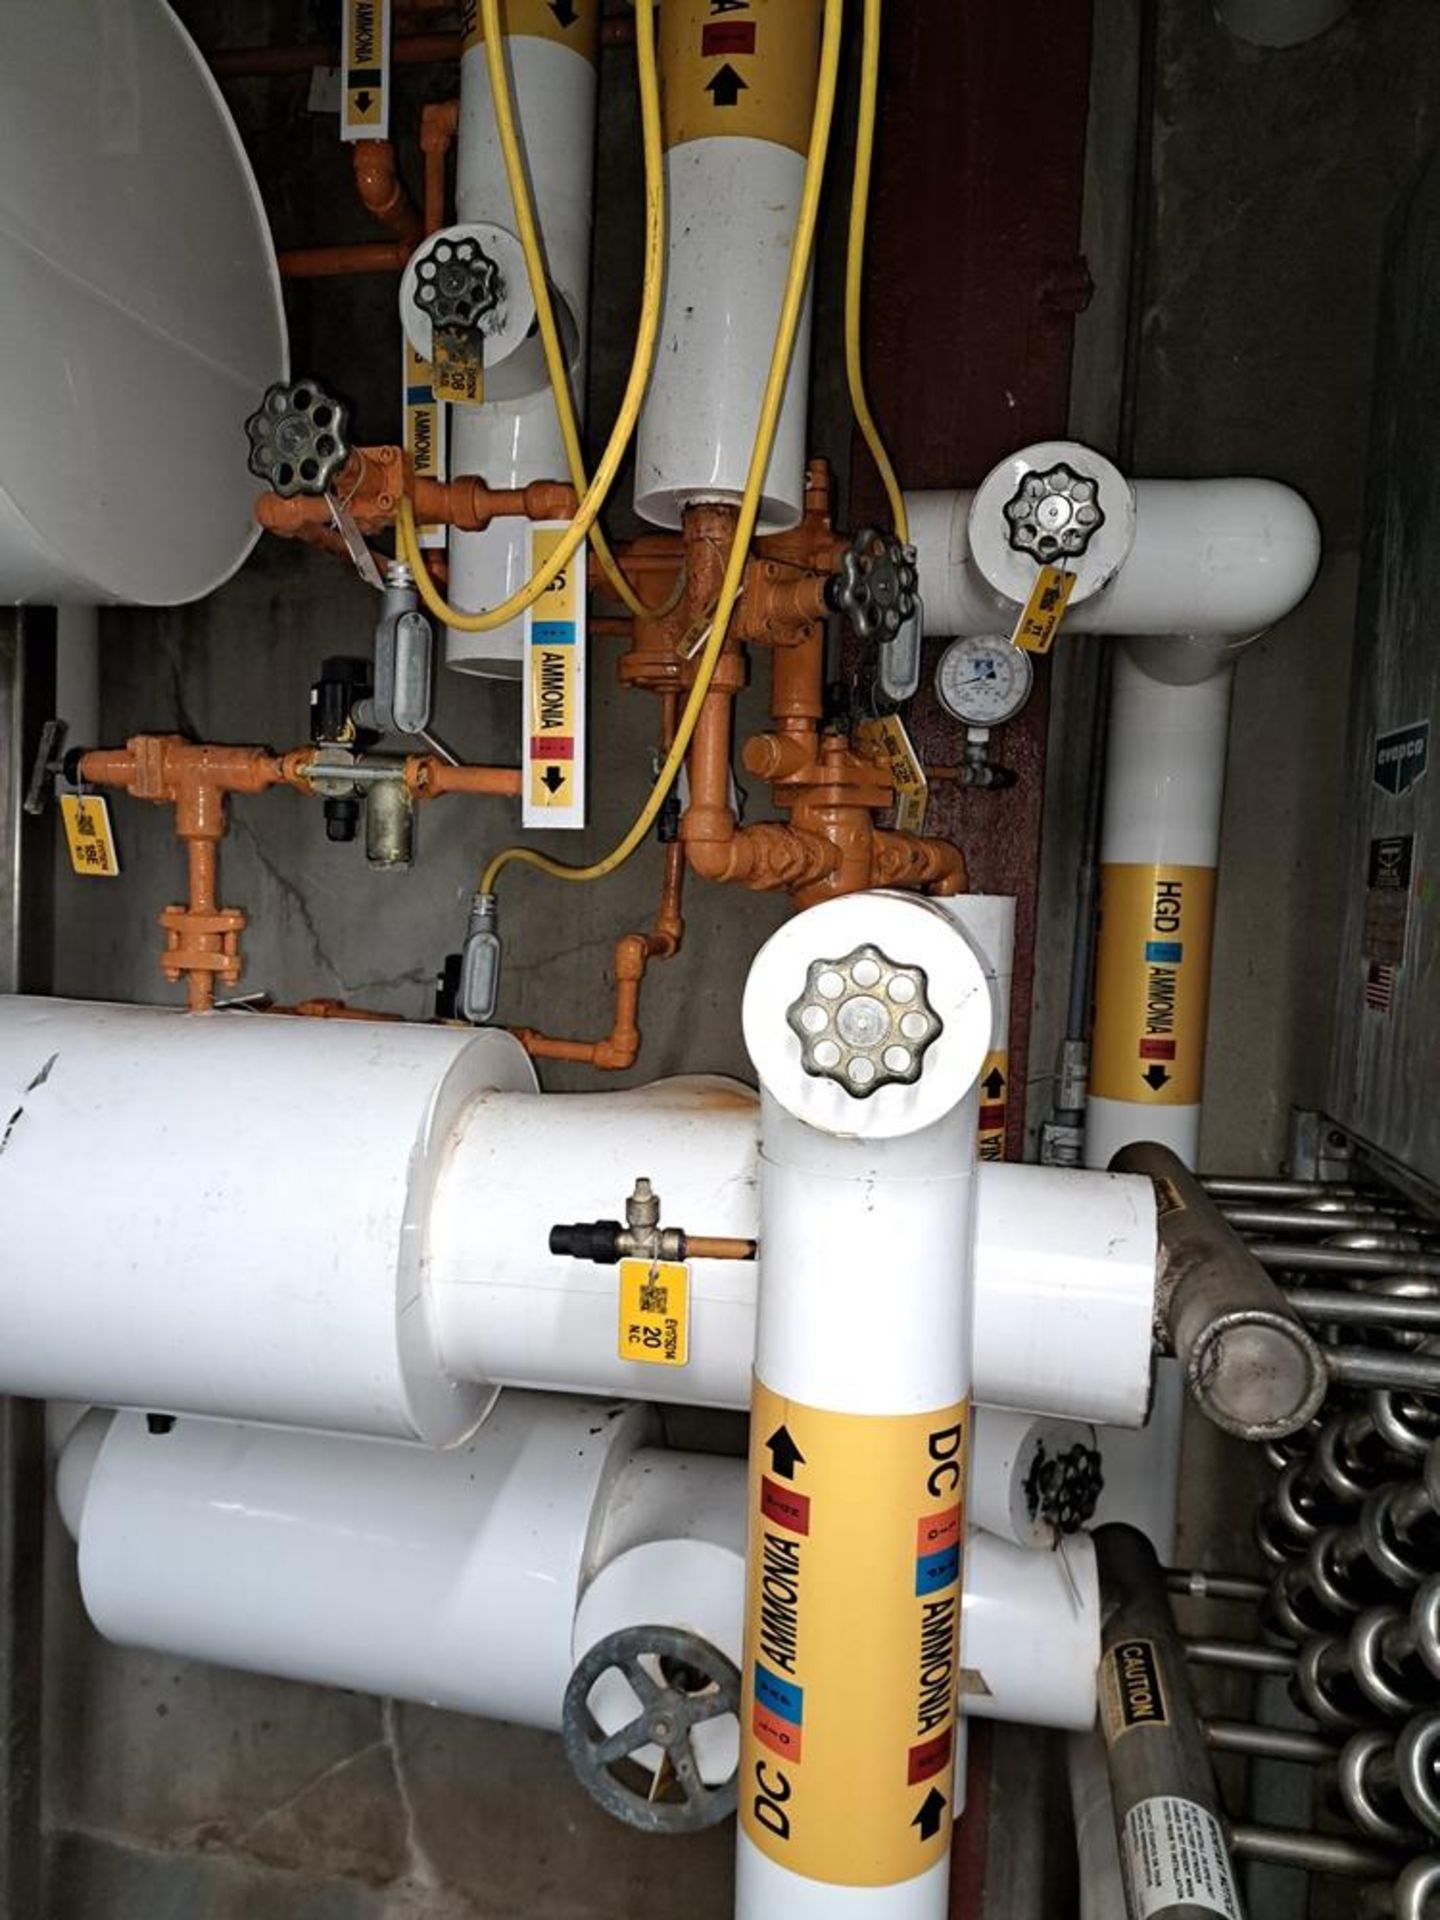 Refrigeration Valve System Ammonia Surge Drum, NB #27819, WP 300 PSI, Mfg. 2015L: Required Loading - Image 2 of 2